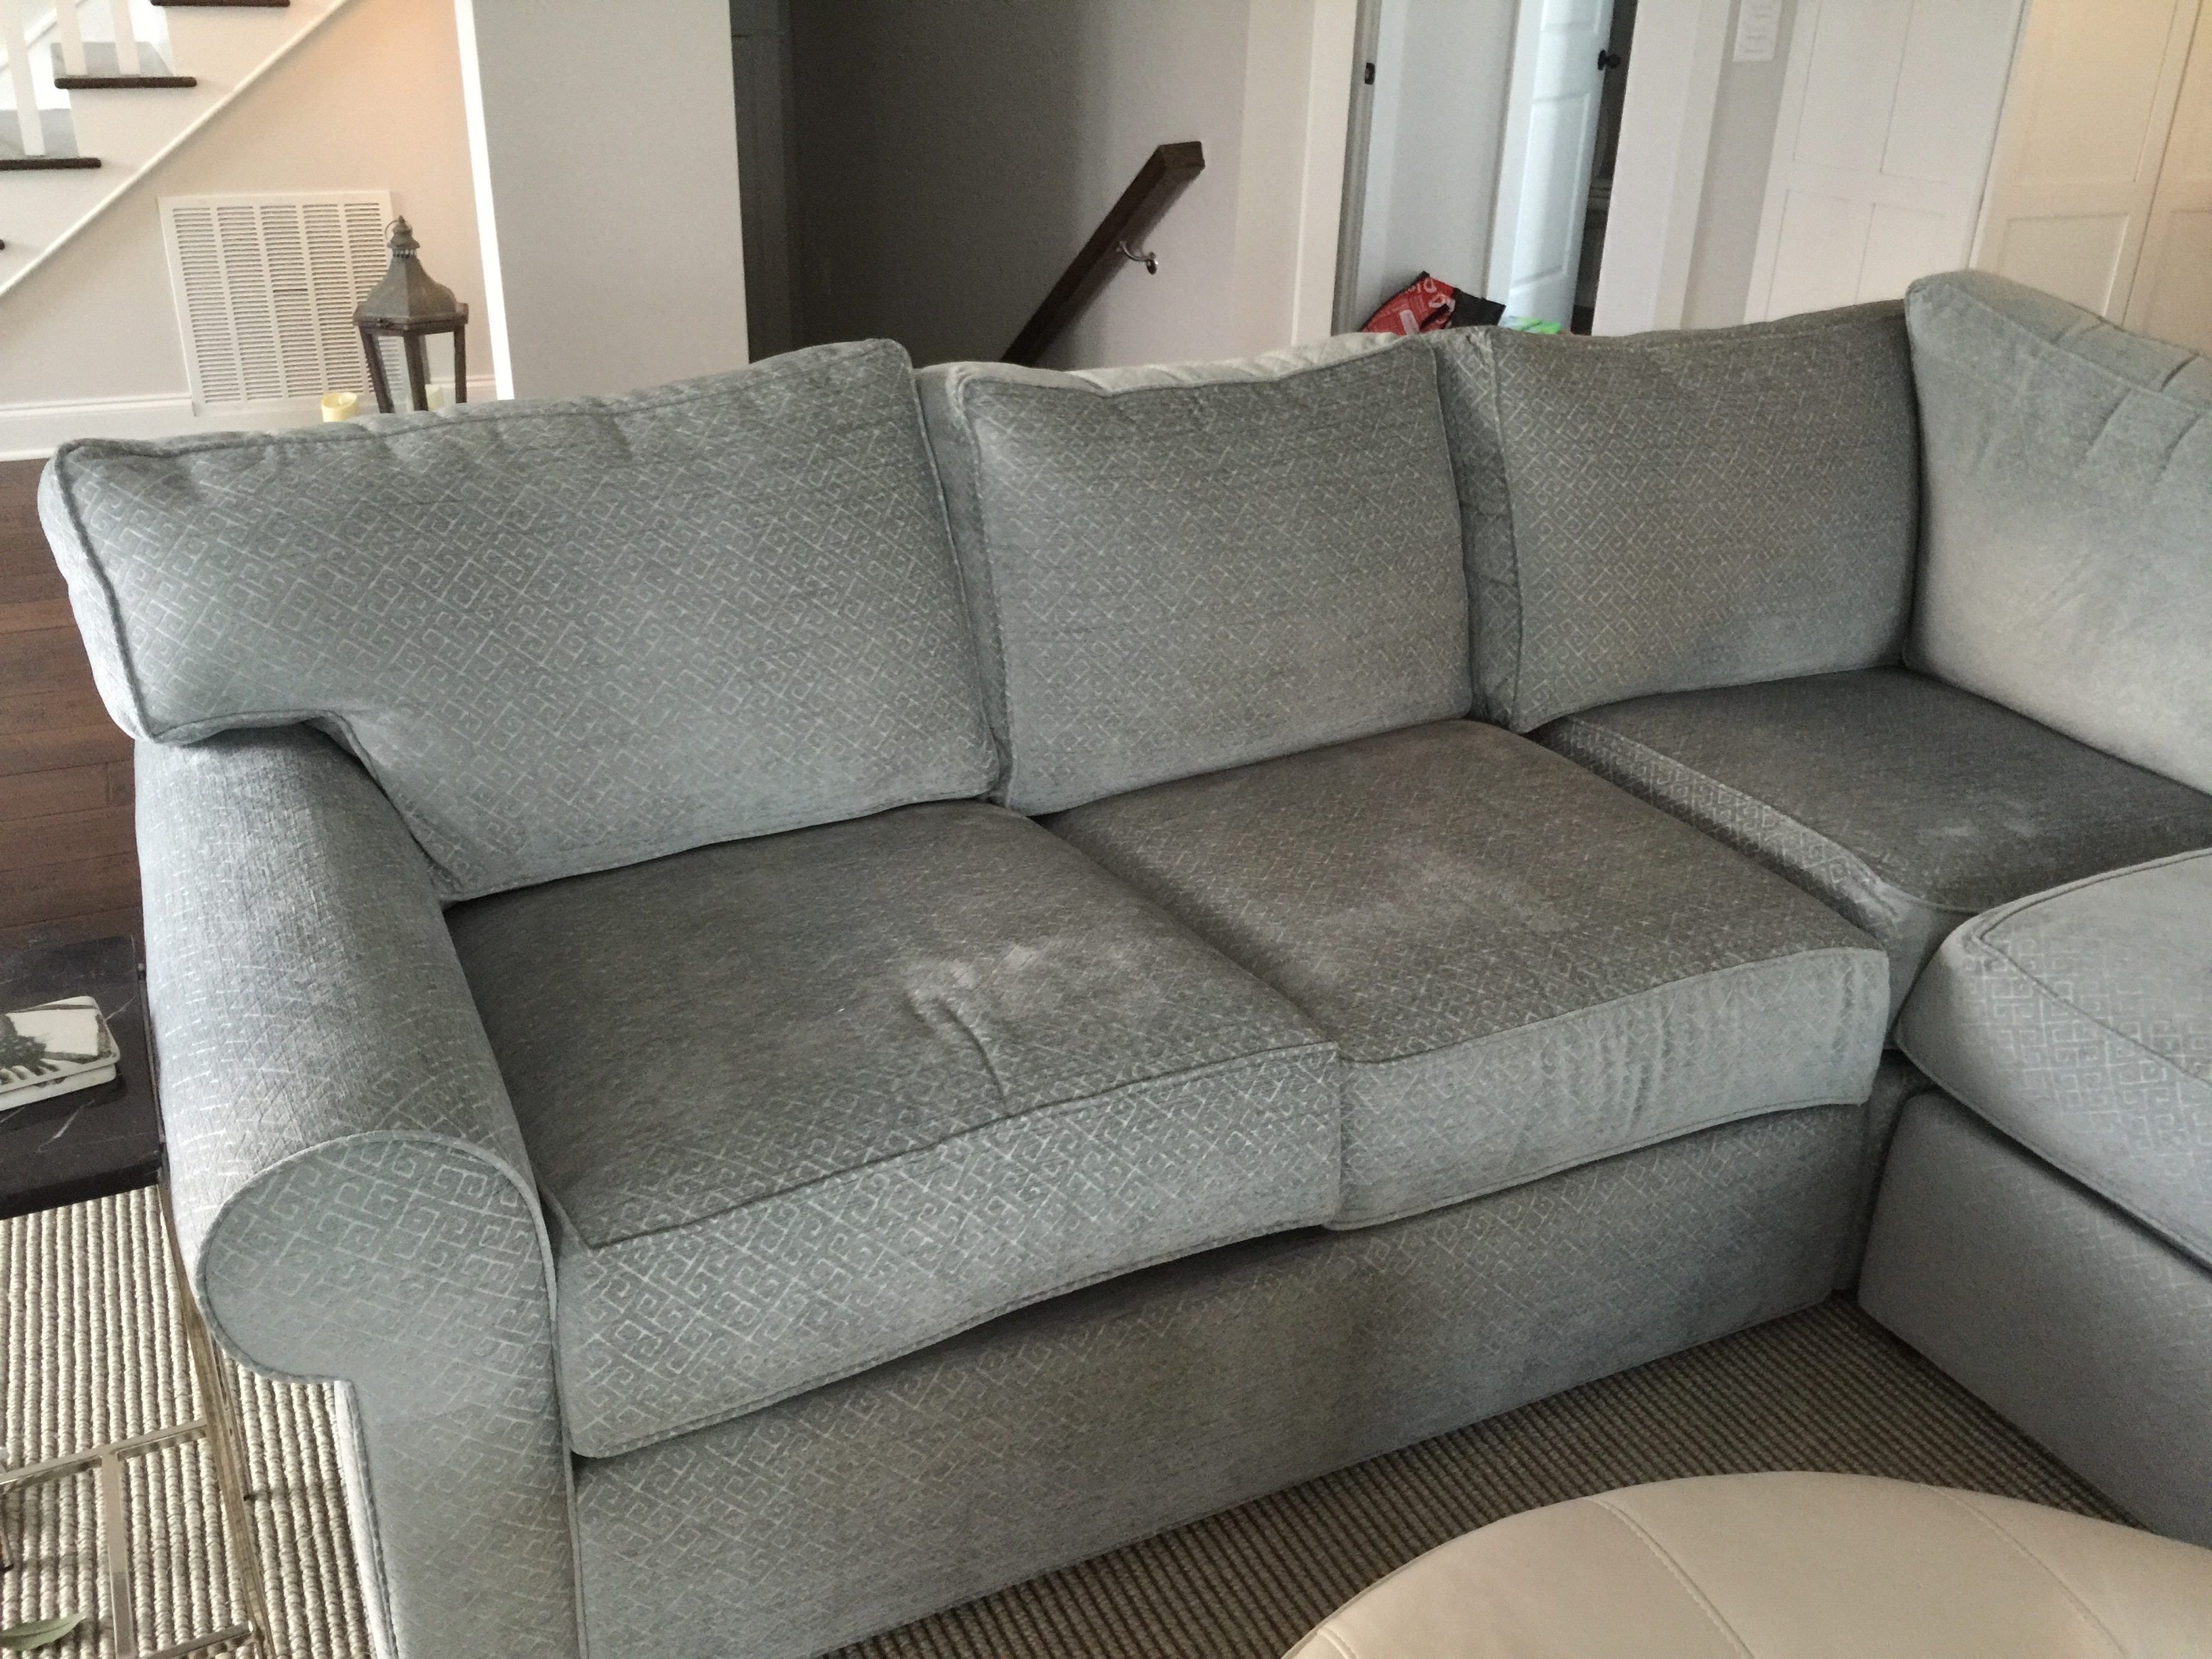 Functionalities Regarding Favorite Sectional Sofas At Ethan Allen (View 12 of 15)